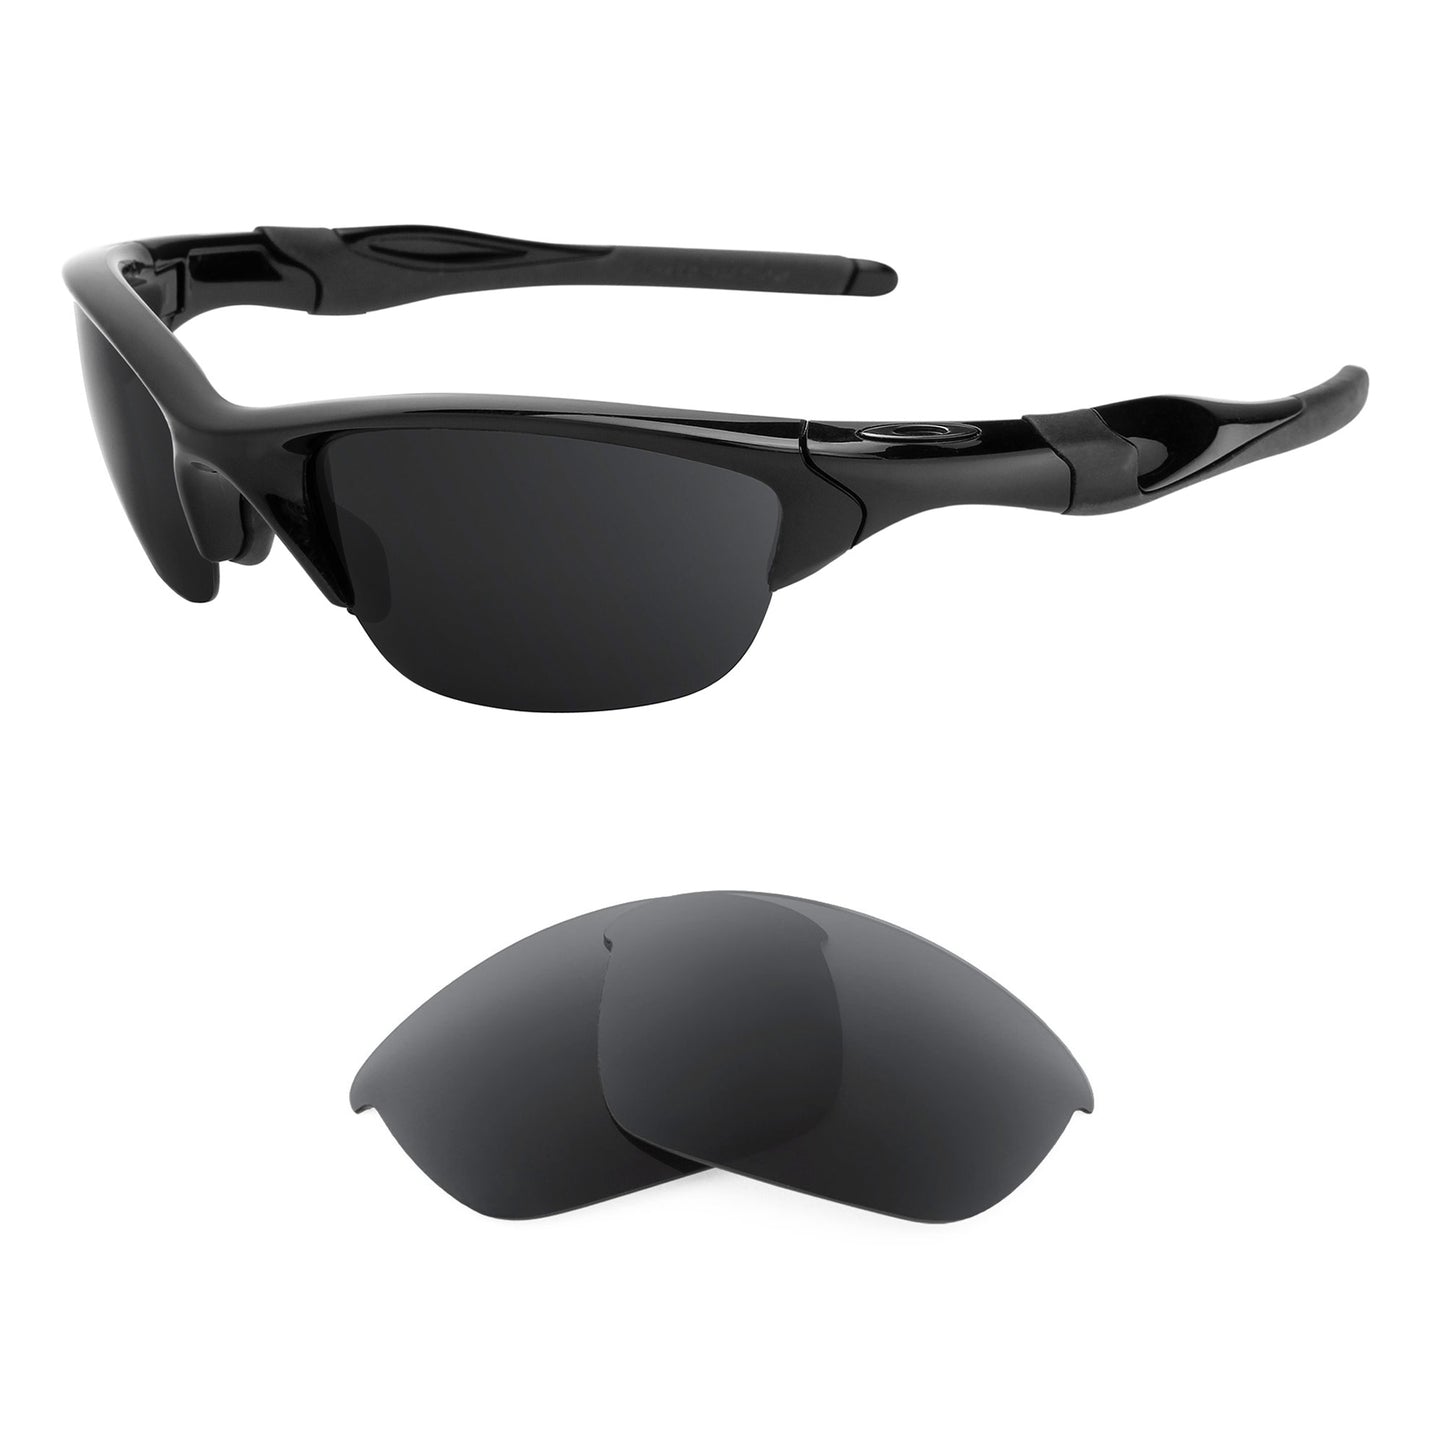 Oakley Half Jacket 2.0 sunglasses with replacement lenses